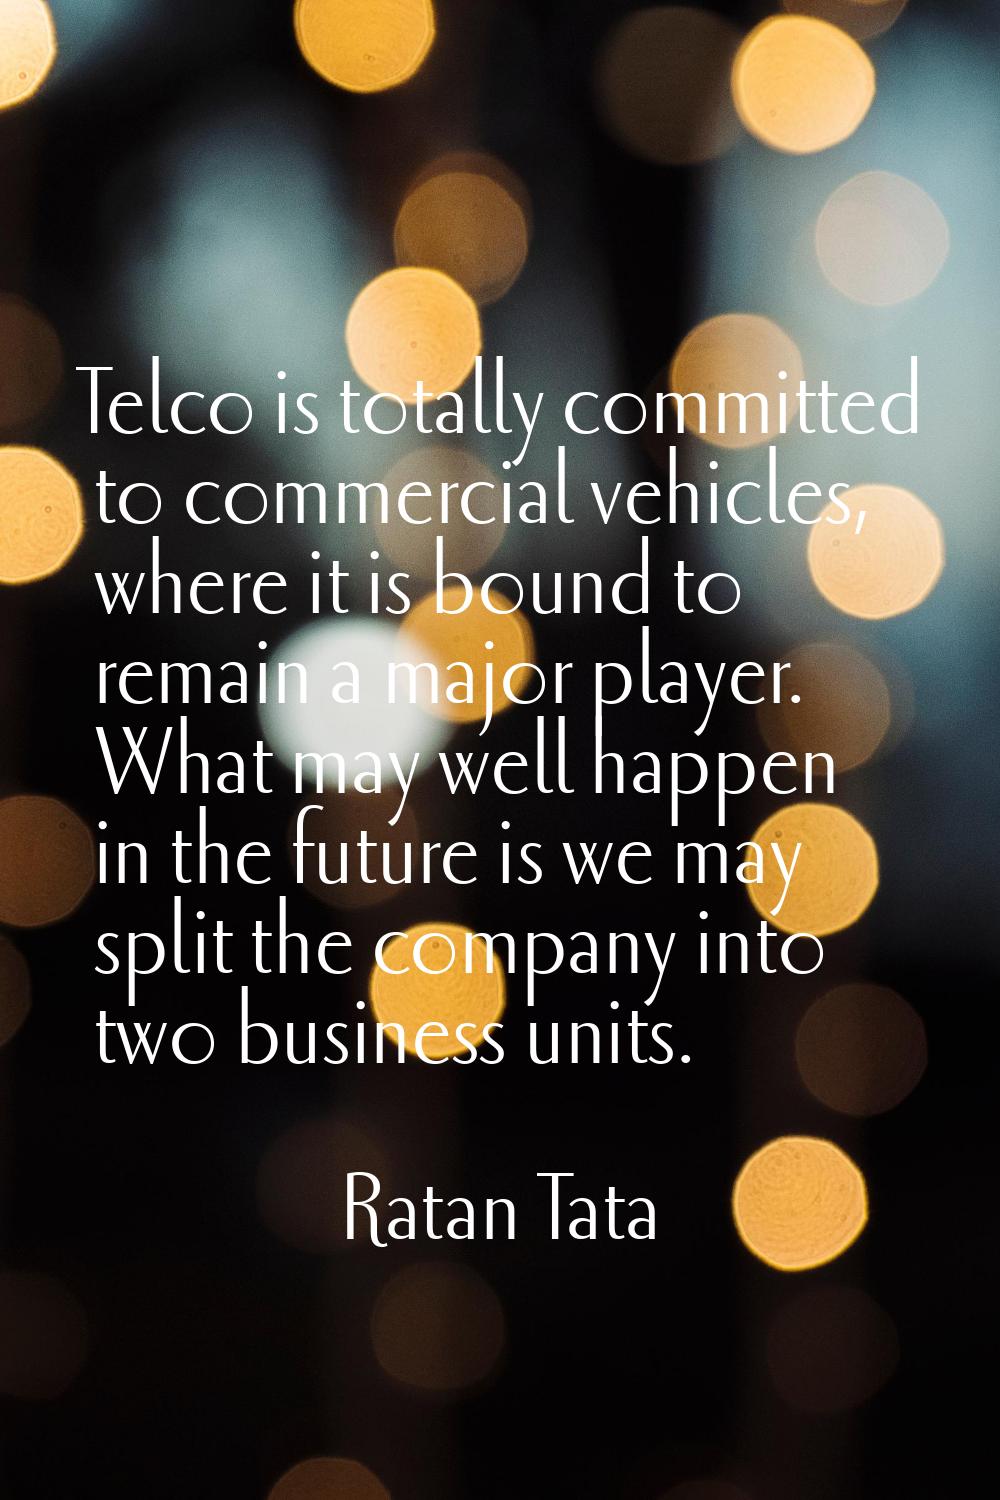 Telco is totally committed to commercial vehicles, where it is bound to remain a major player. What